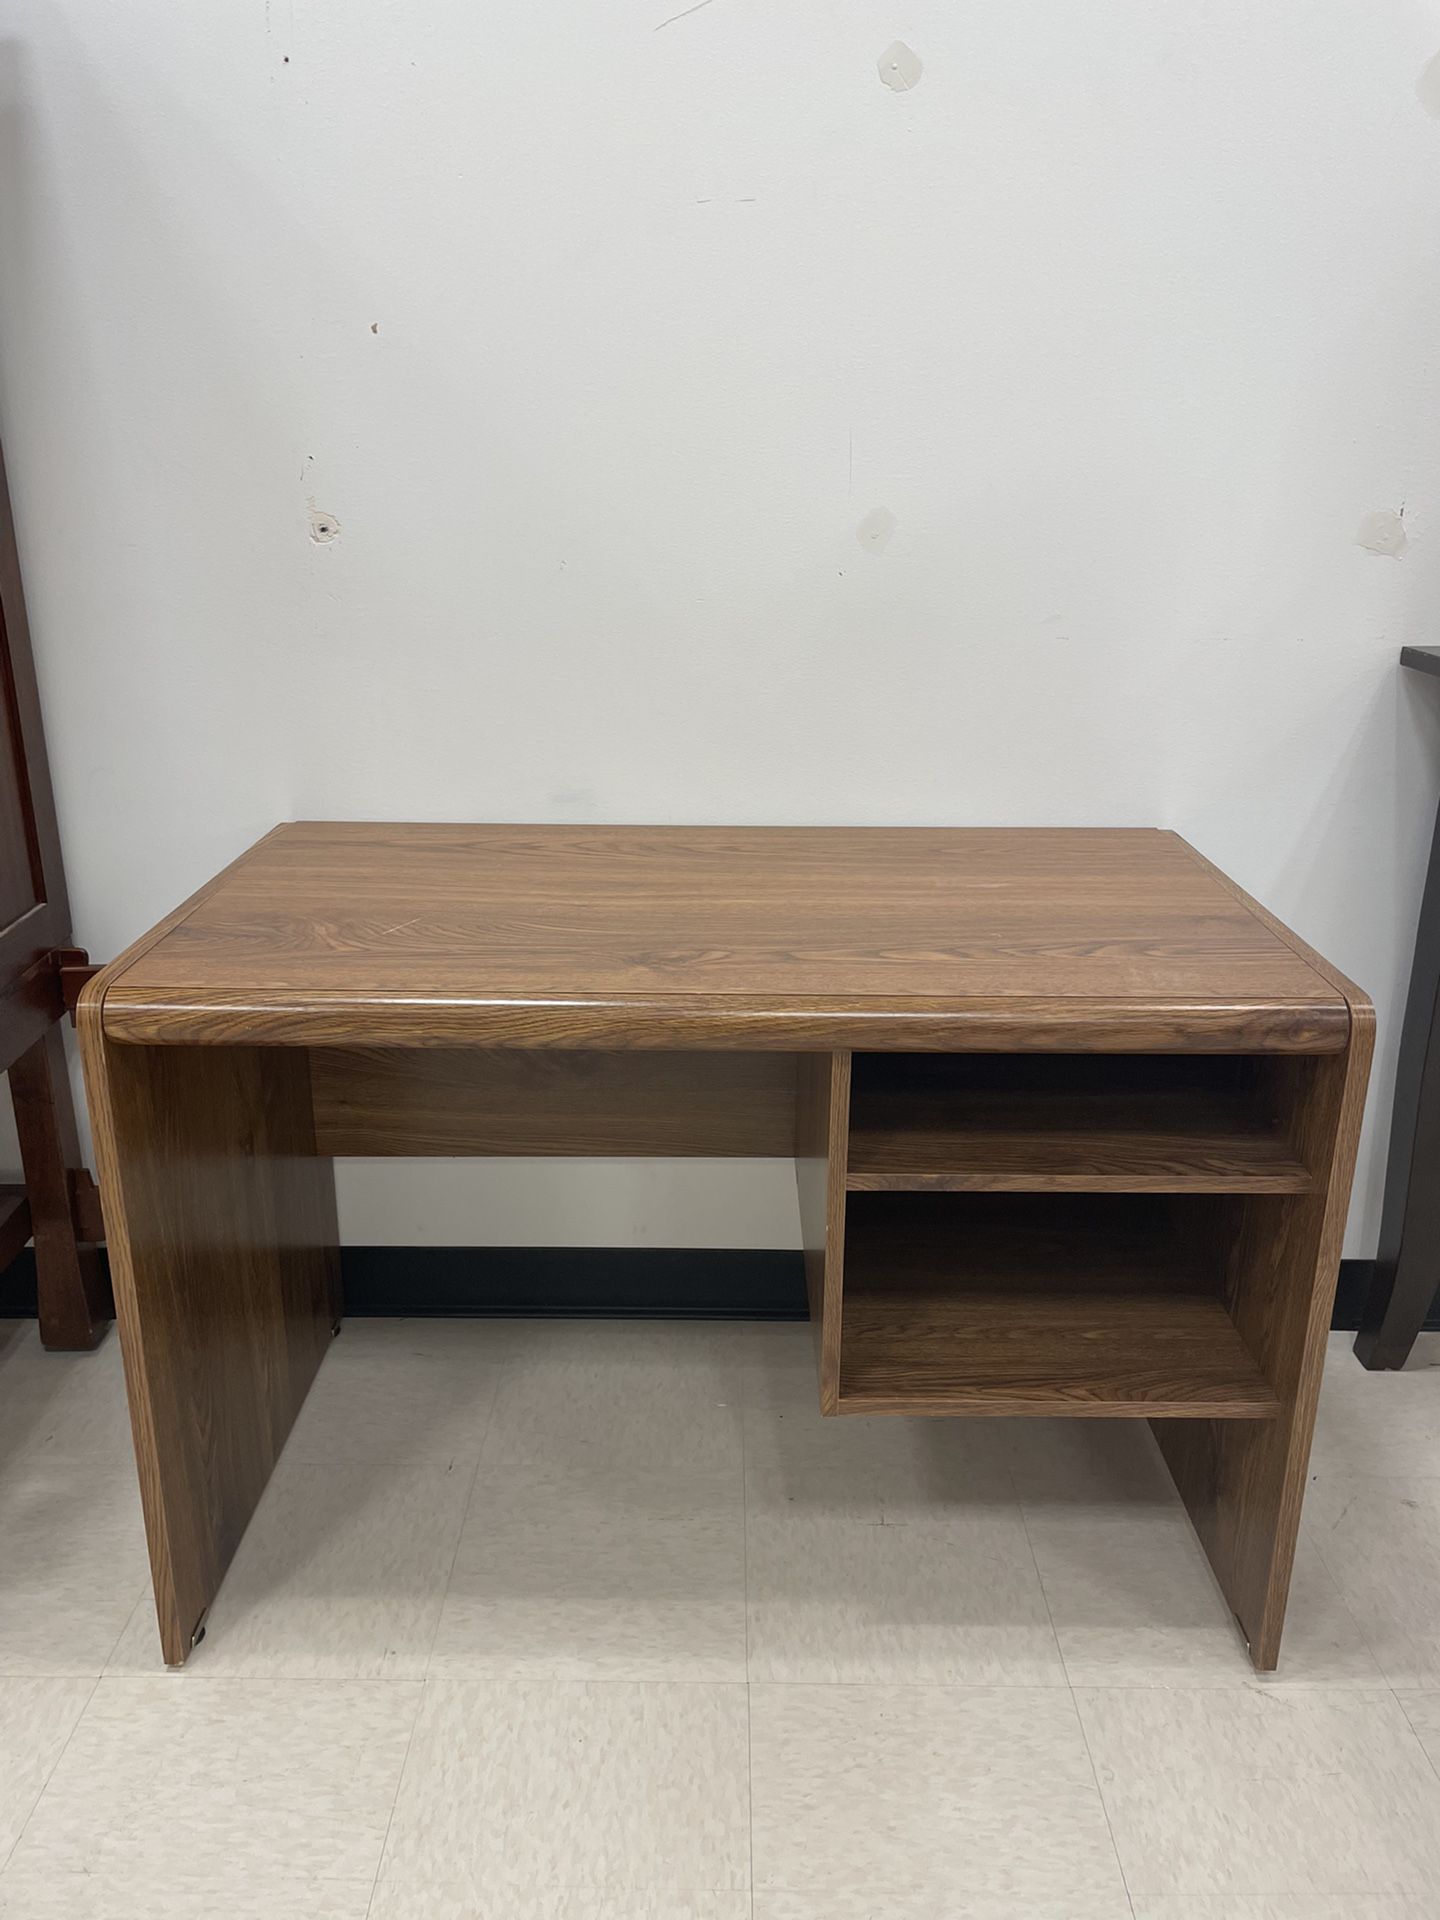 Small Brown Desk With Shelves